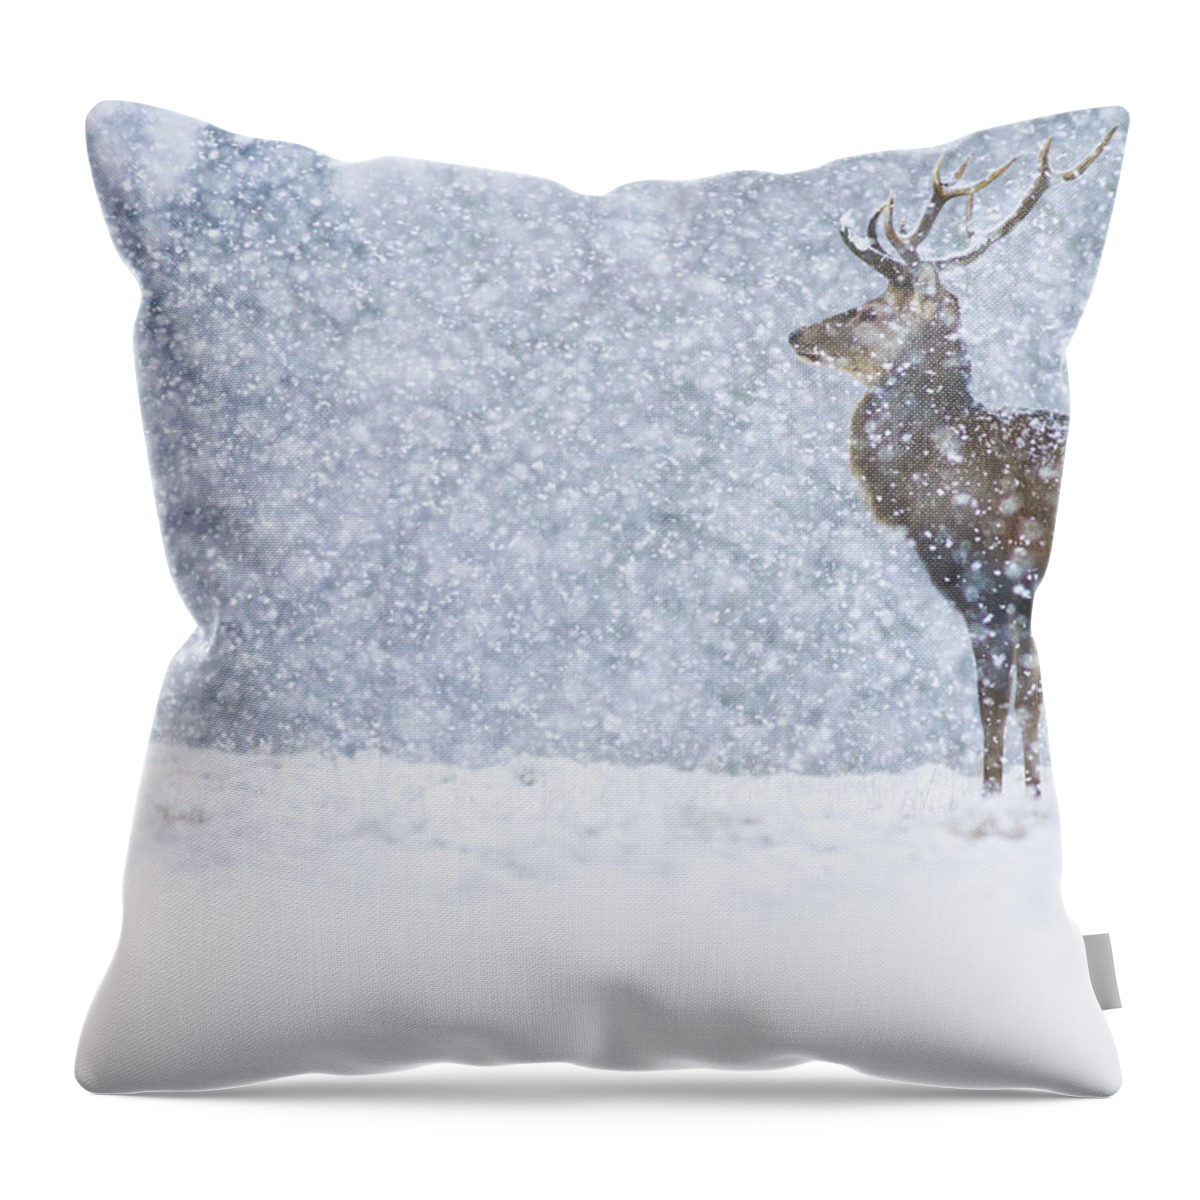 Nis Throw Pillow featuring the photograph Red Deer Stag In Snowfall Derbyshire Uk by James Shooter